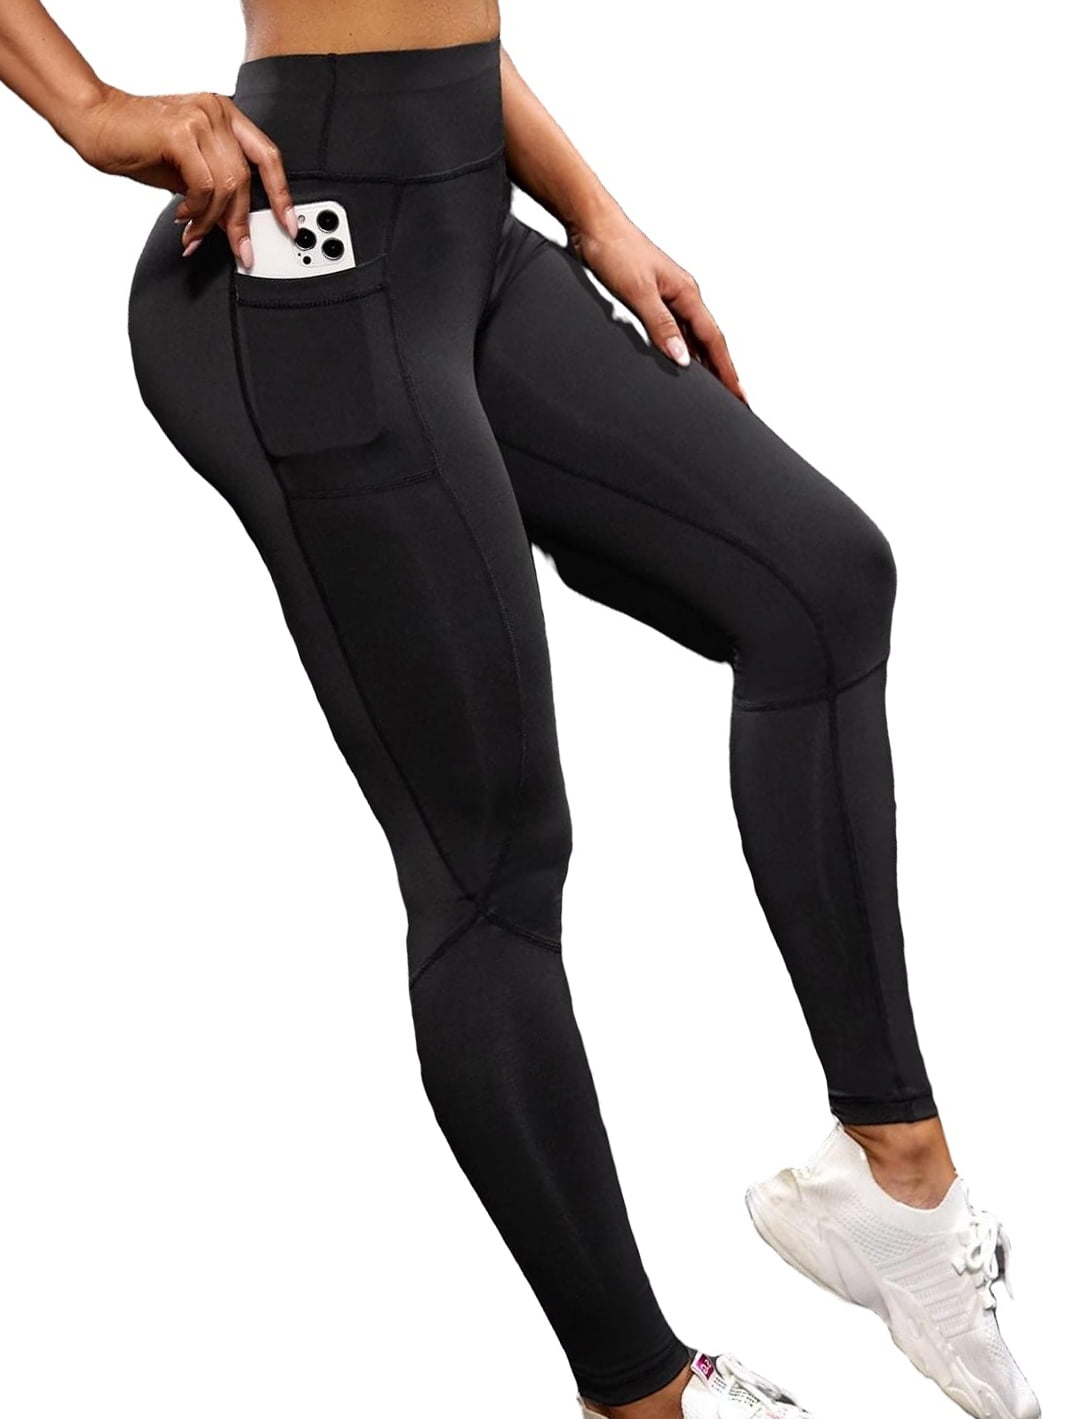 Womens Activewear Sports Leggings Solid Leggings with Phone Pocket